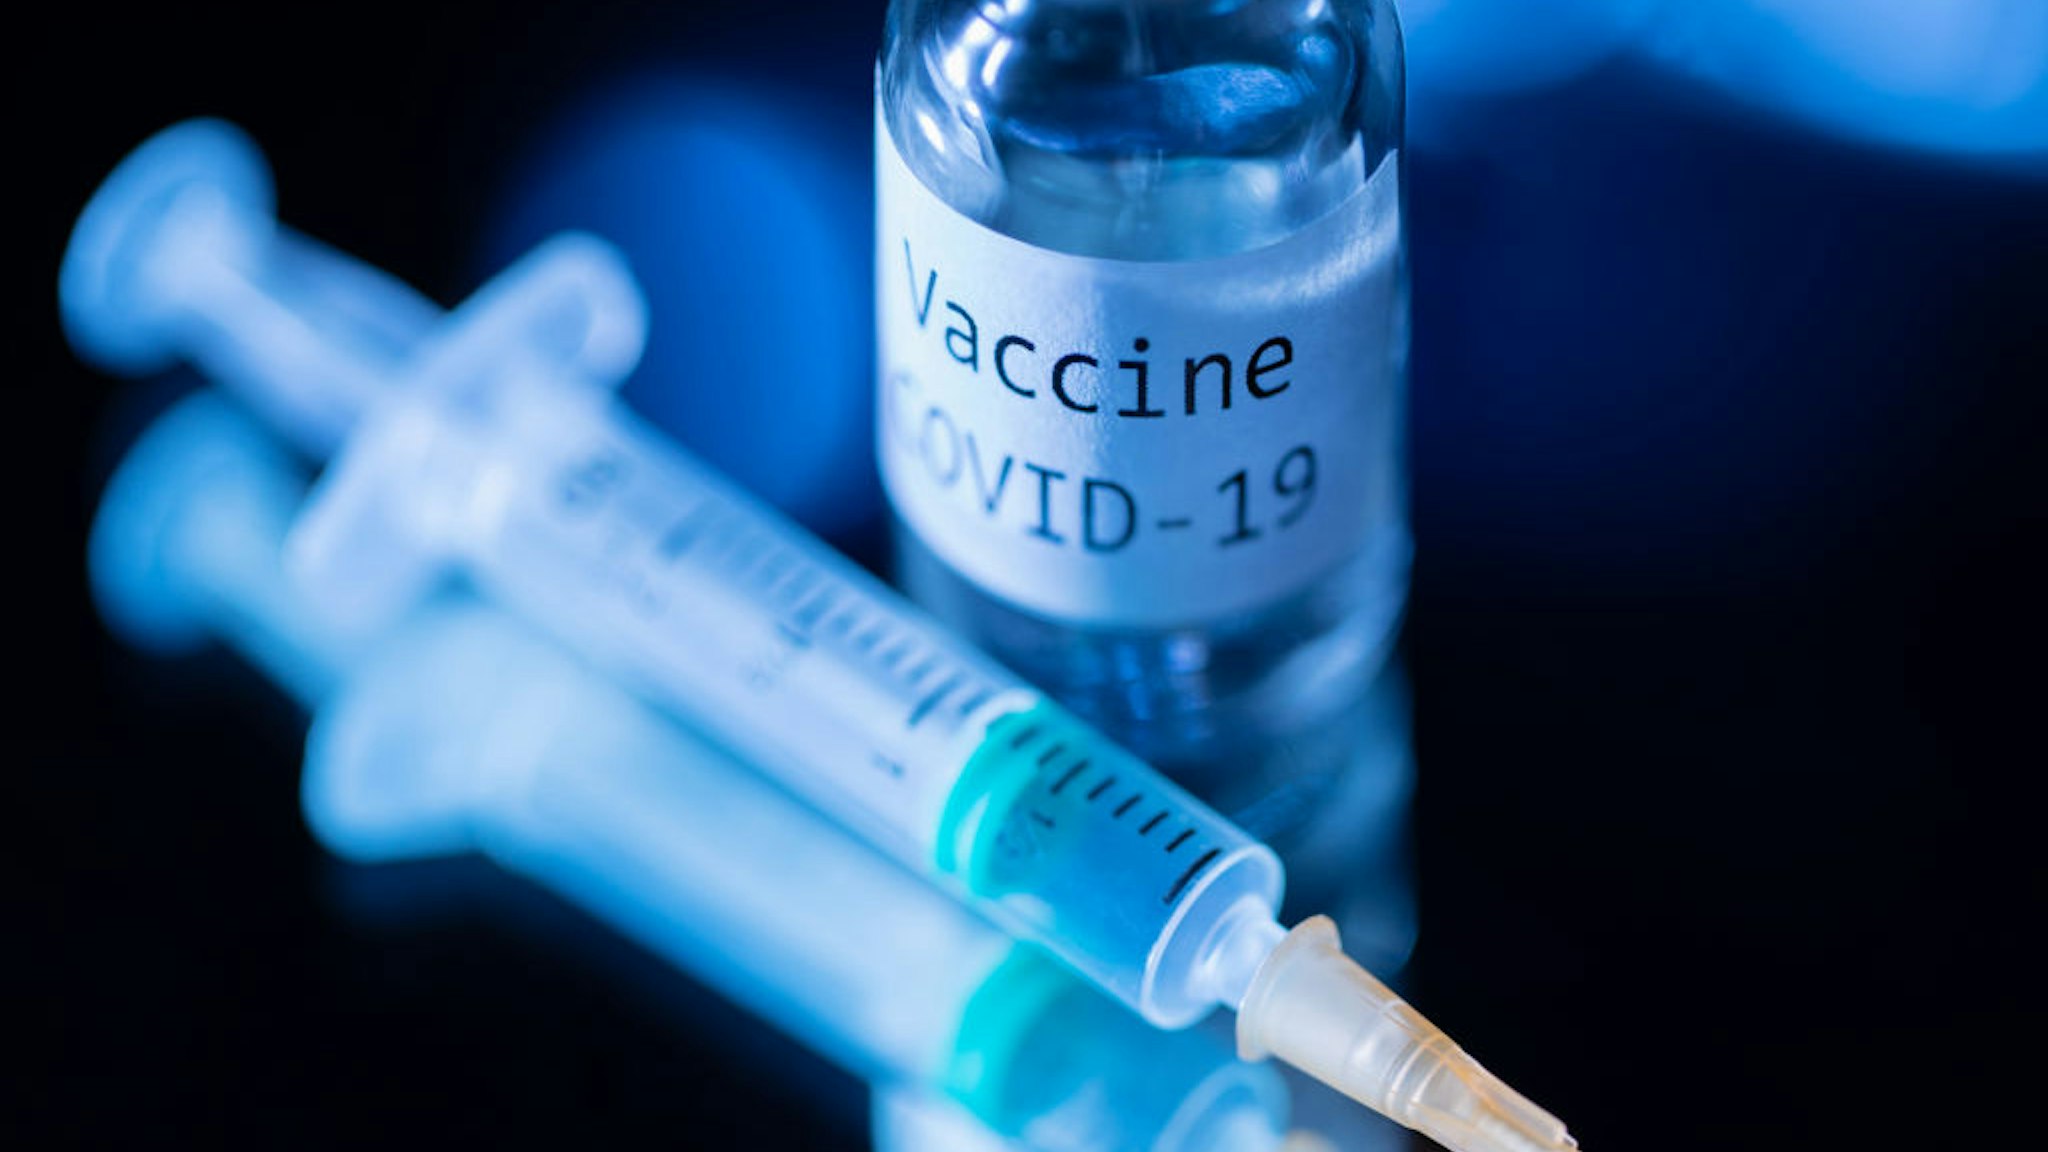 TOPSHOT - This picture taken on November 17, 2020 shows a syringe and a bottle reading "Vaccine Covid-19". - According to the World Health Organization, some 42 "candidate vaccines" against the novel coronavirus Covid-19 are undergoing clinical trials on November 17, 2020. (Photo by JOEL SAGET / AFP) (Photo by JOEL SAGET/AFP via Getty Images)